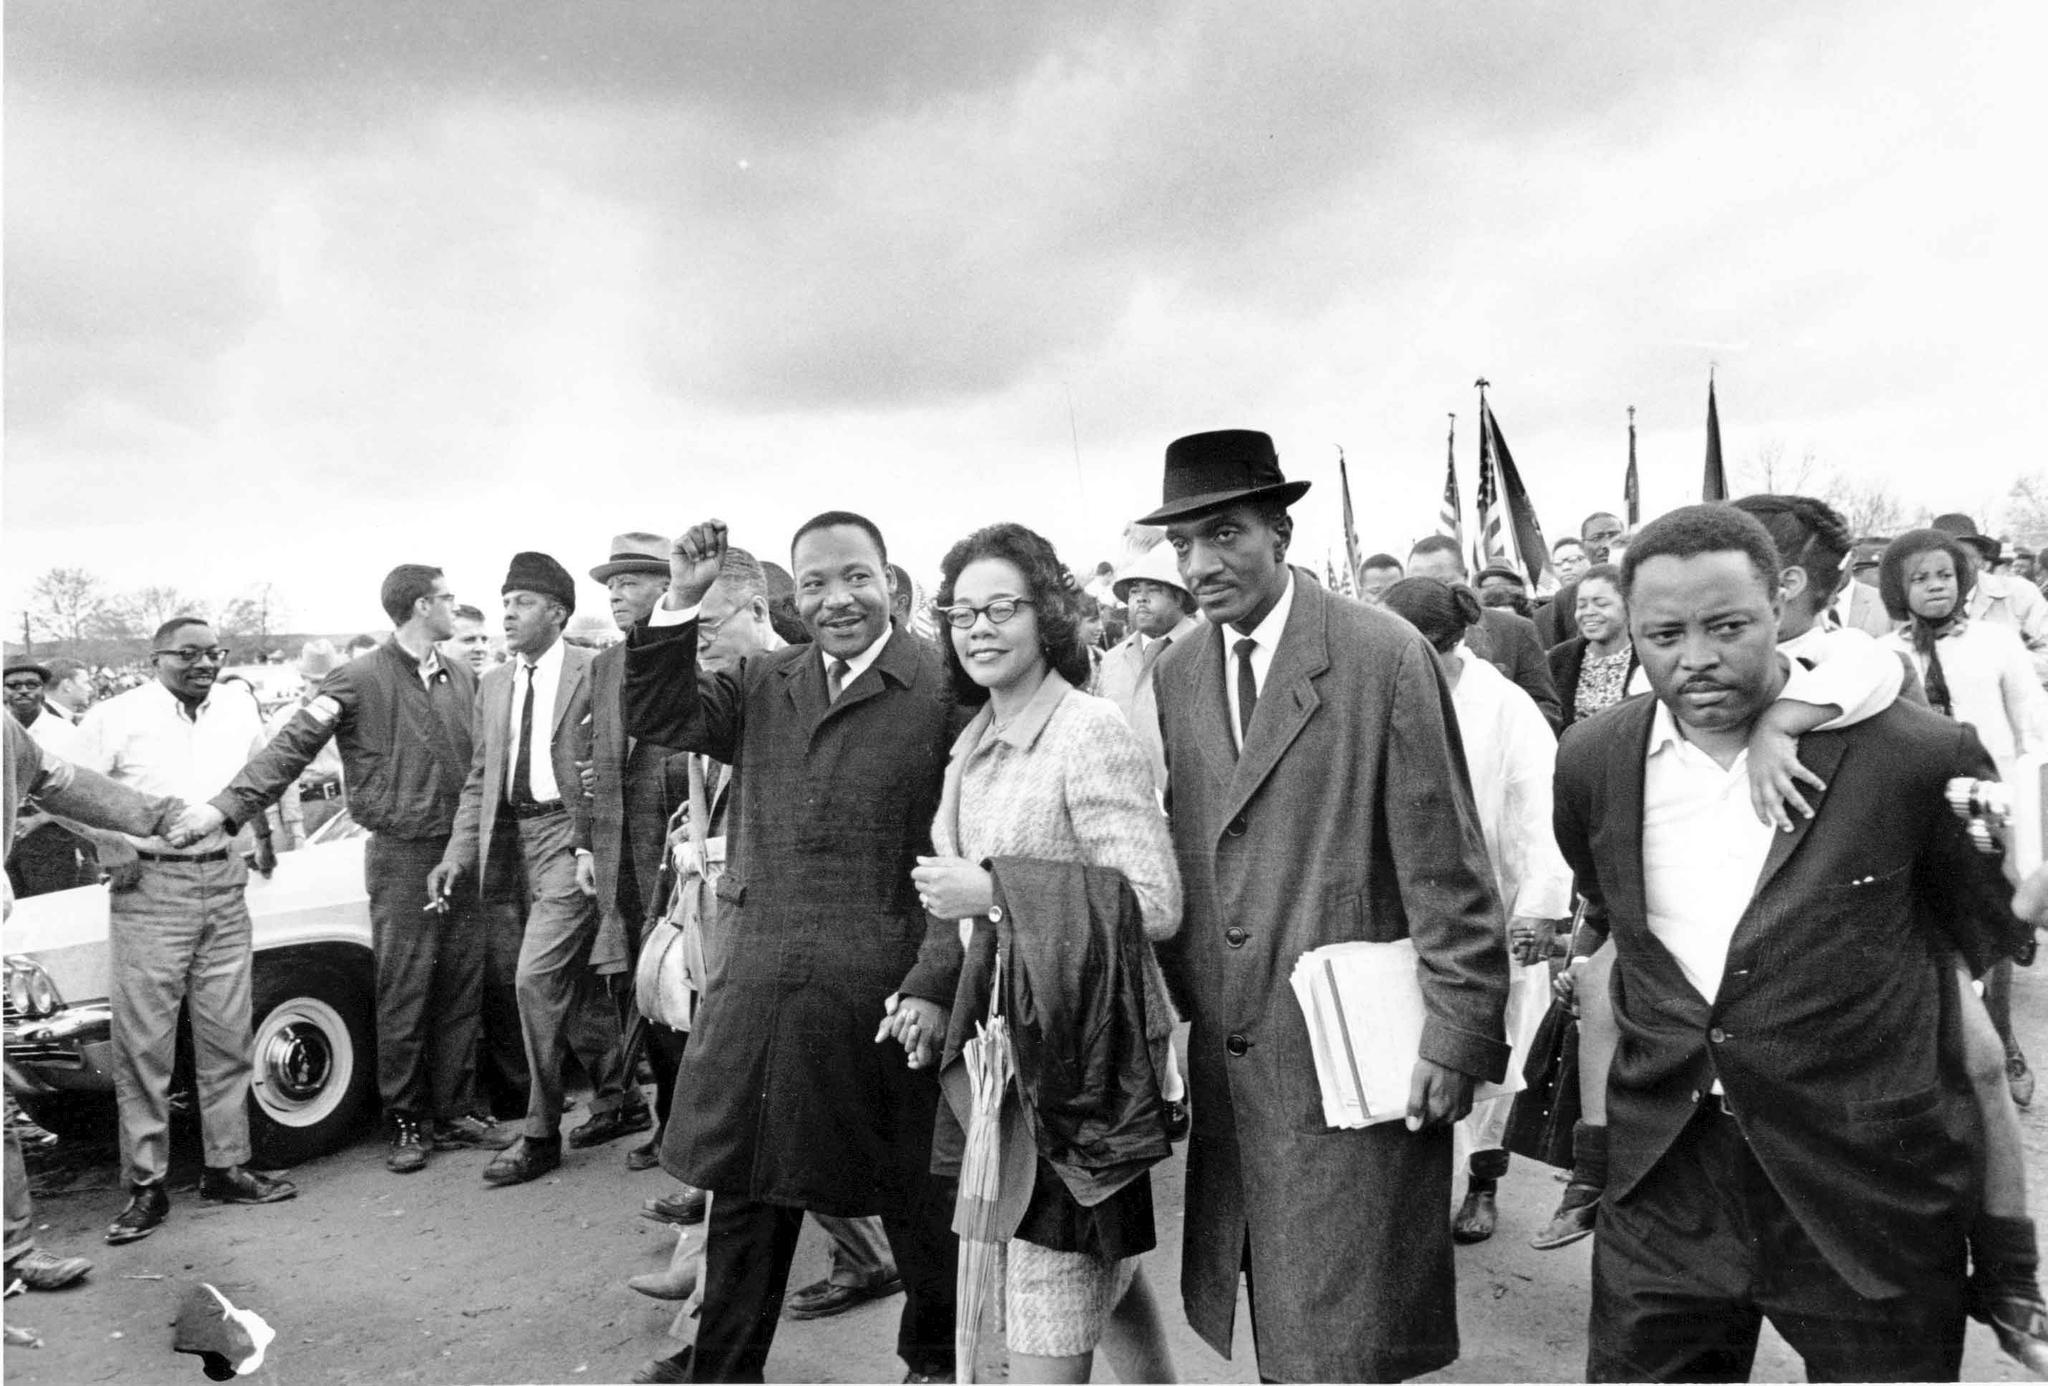 Dr. Martin Luther King Jr. and his wife Coretta Scott King